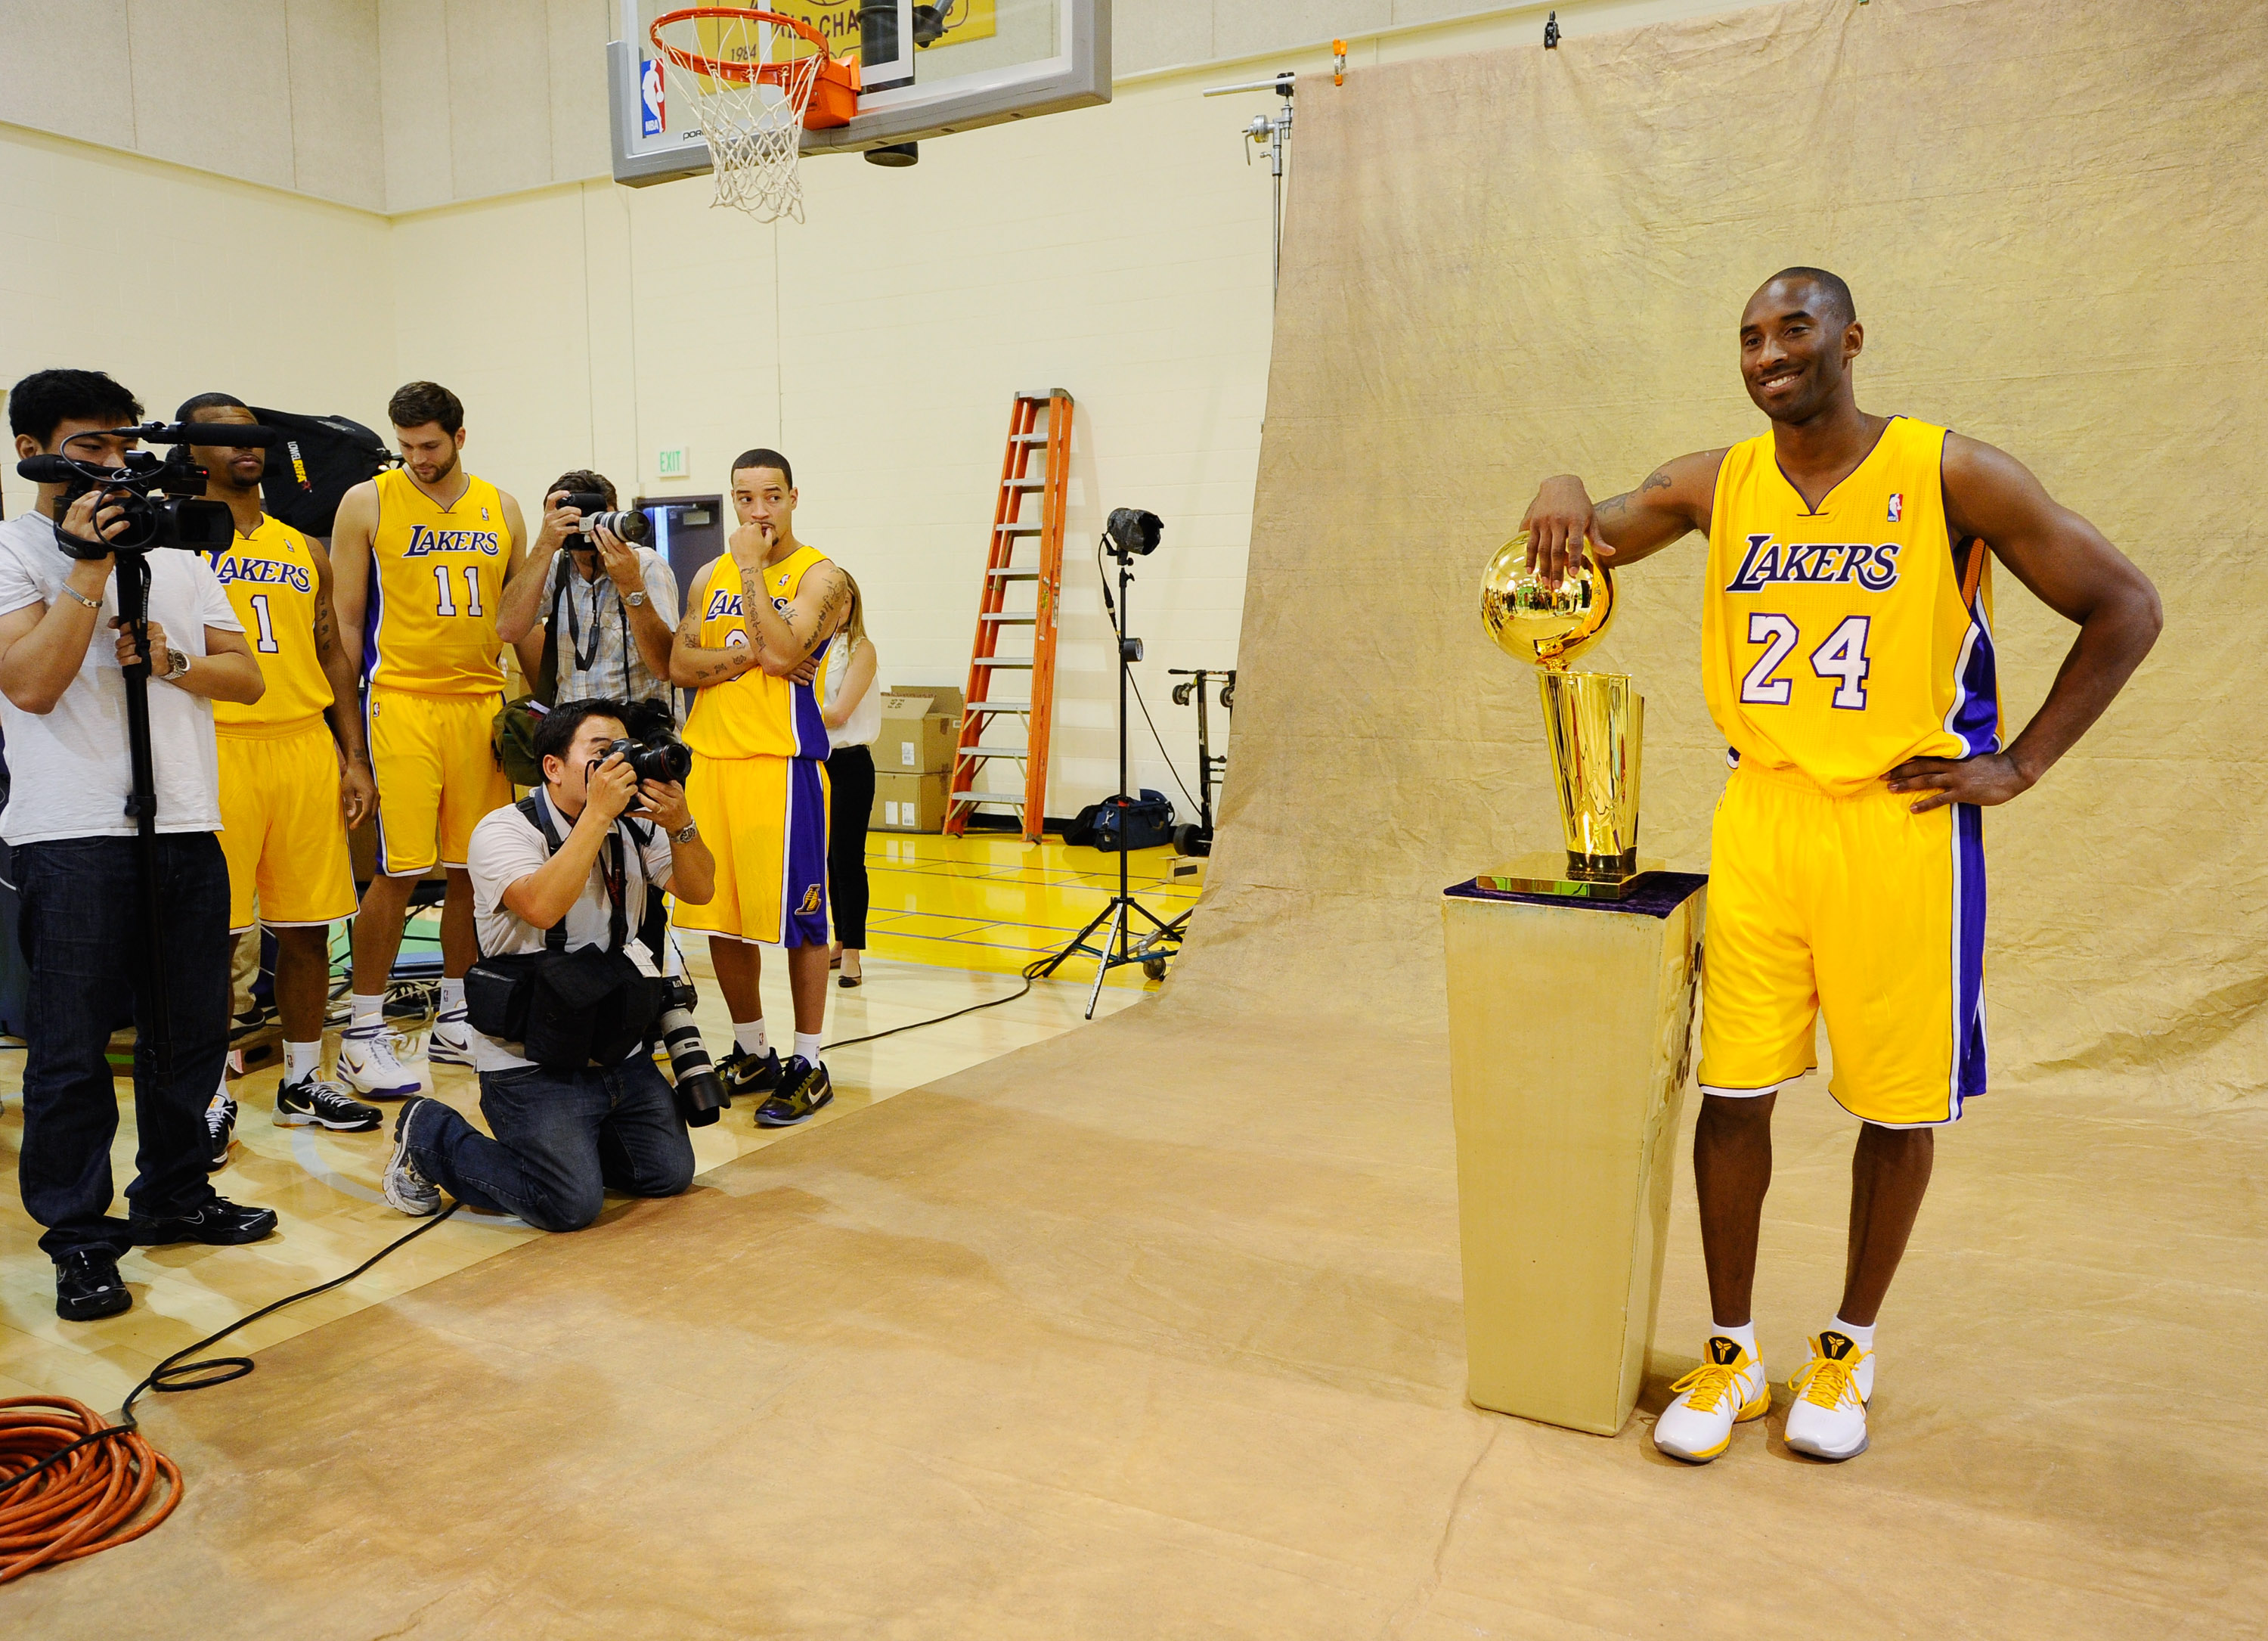 Lakers win 16th title; Kobe gets fifth ring